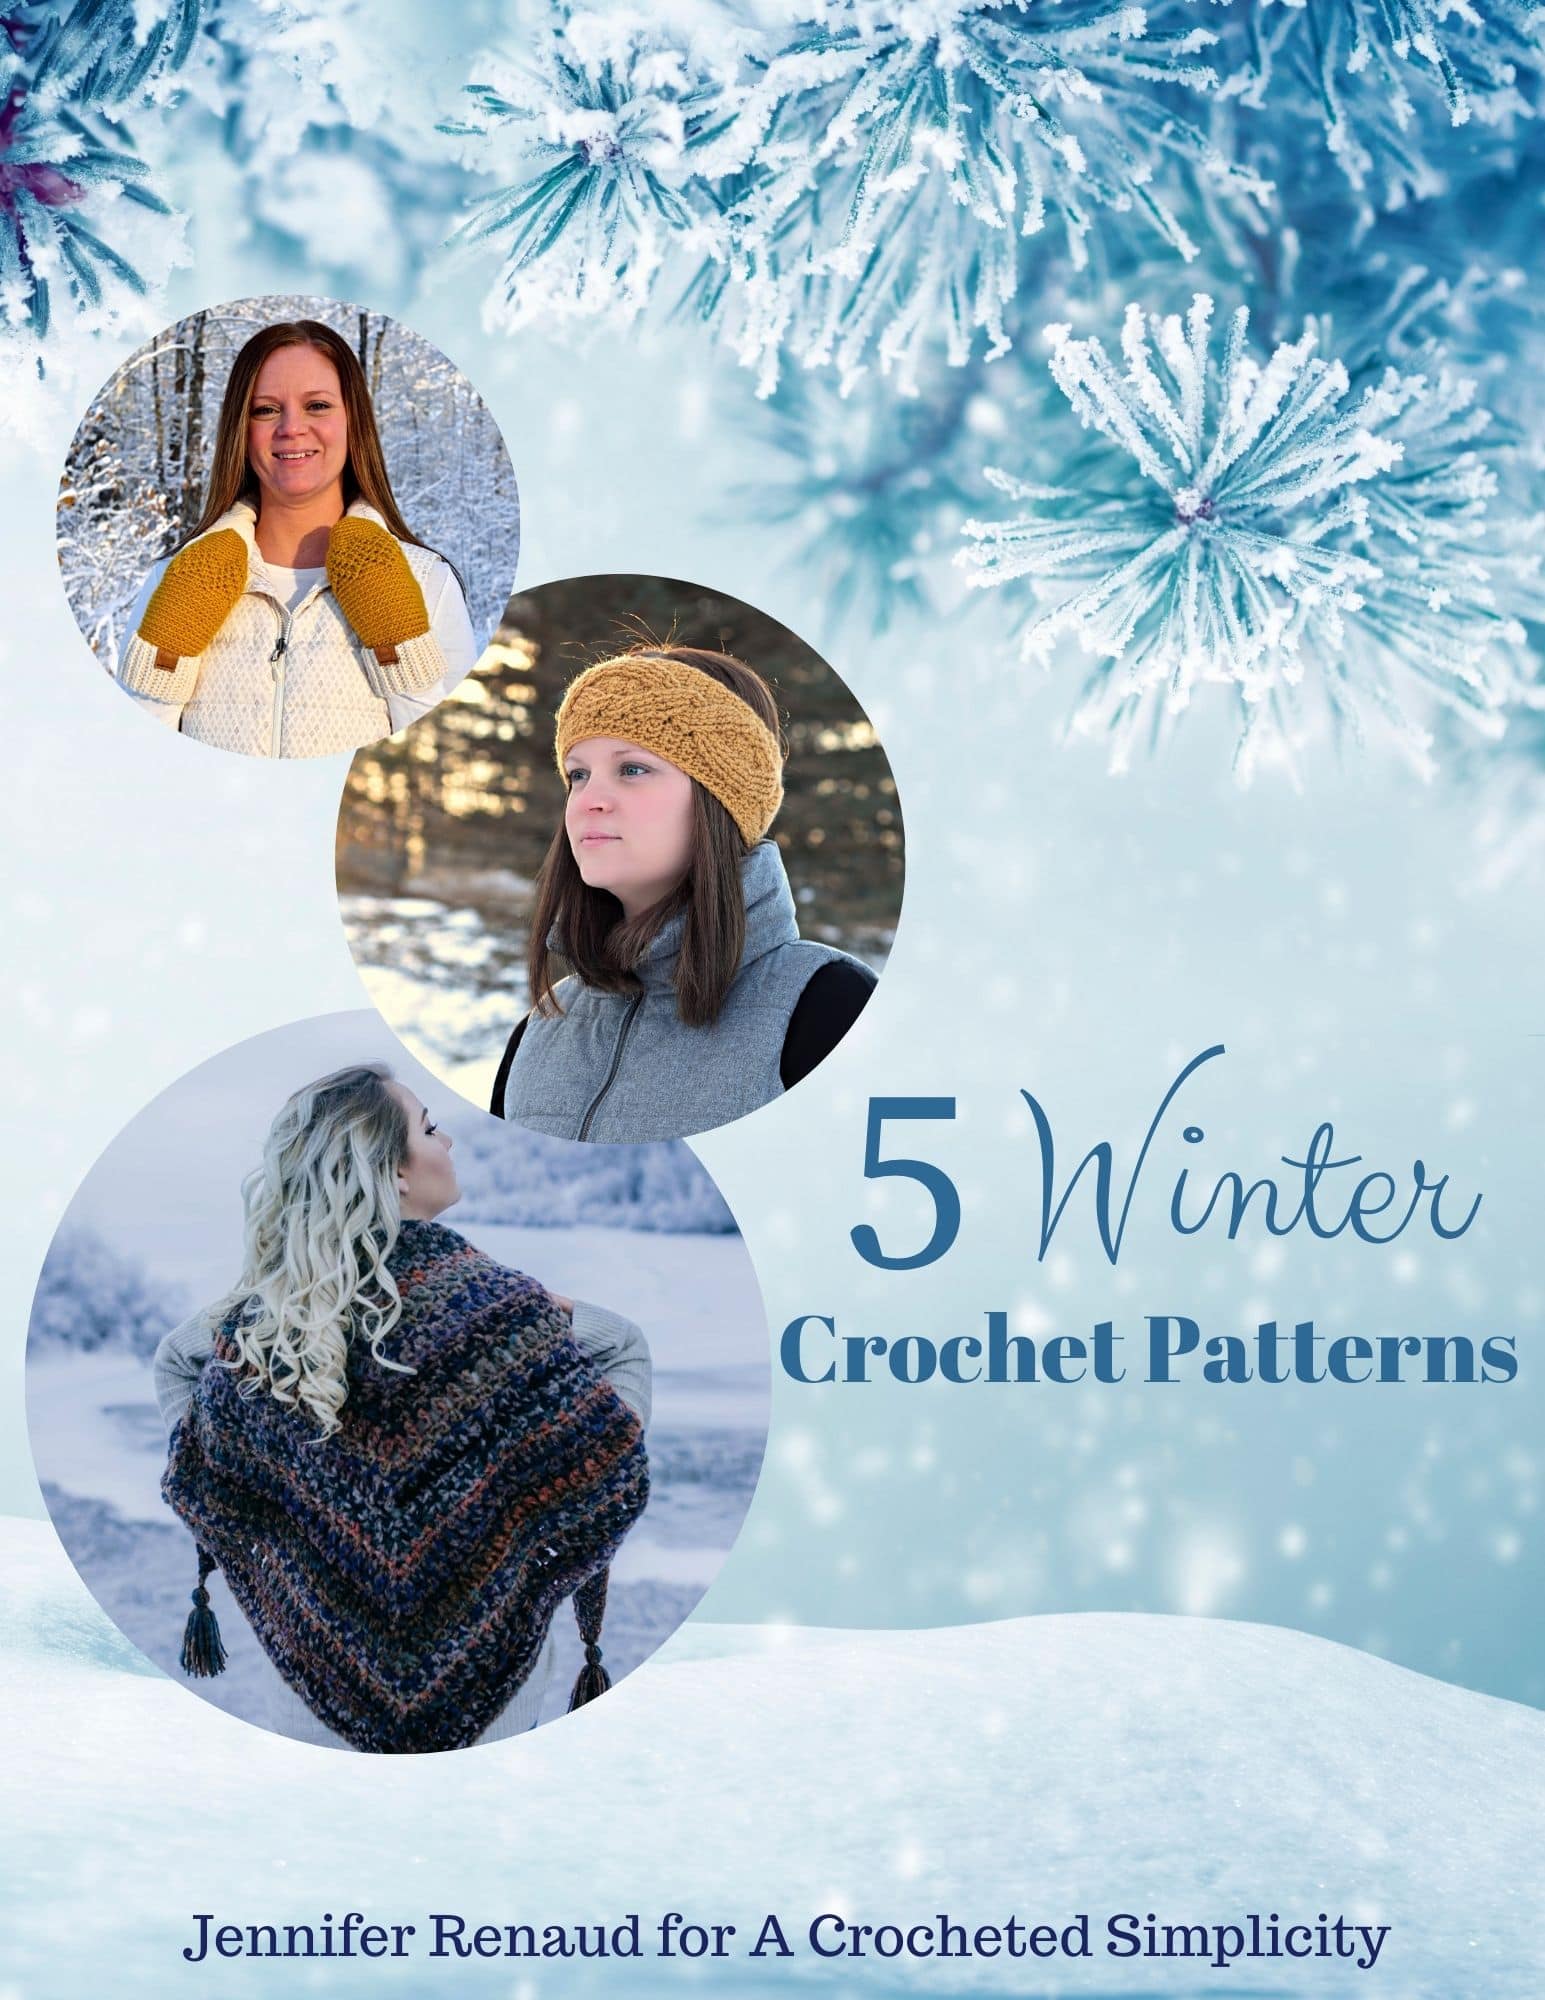 Blue and white wintery cover for a five winter crochet patterns free ebook.